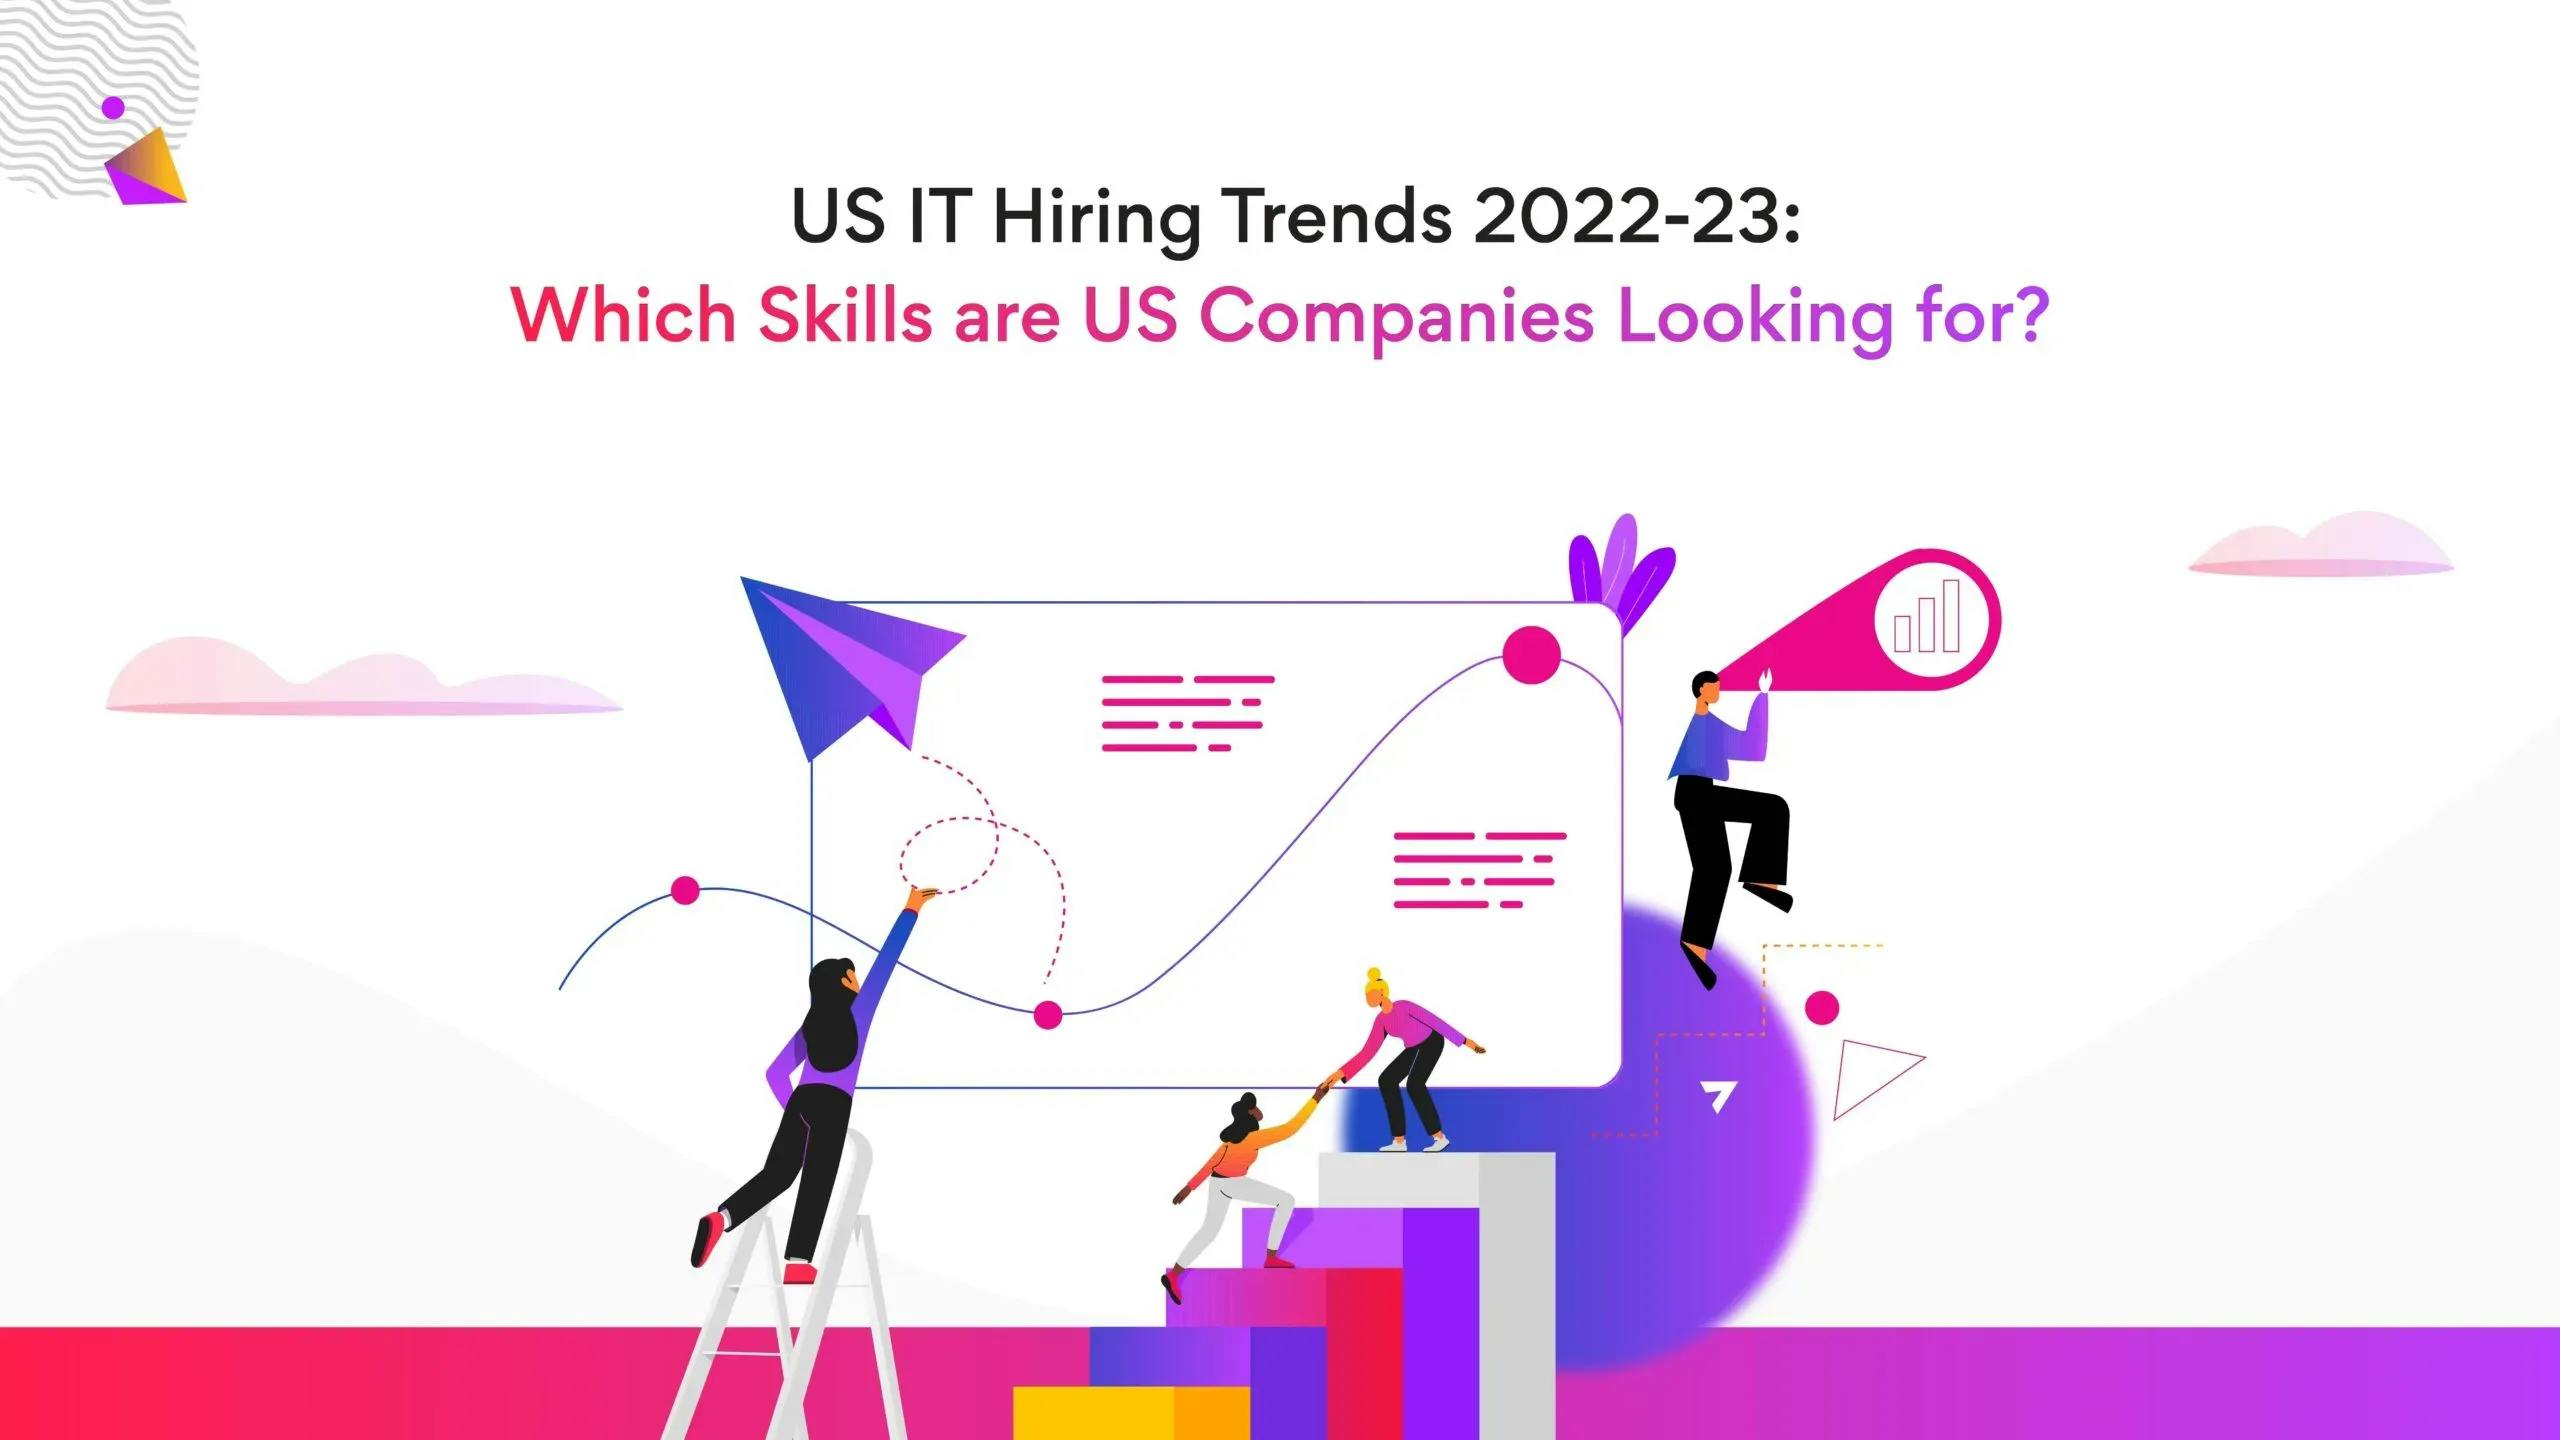 IT Hiring Trends 2022-23: 10 Most In-Demand Skills in US Companies